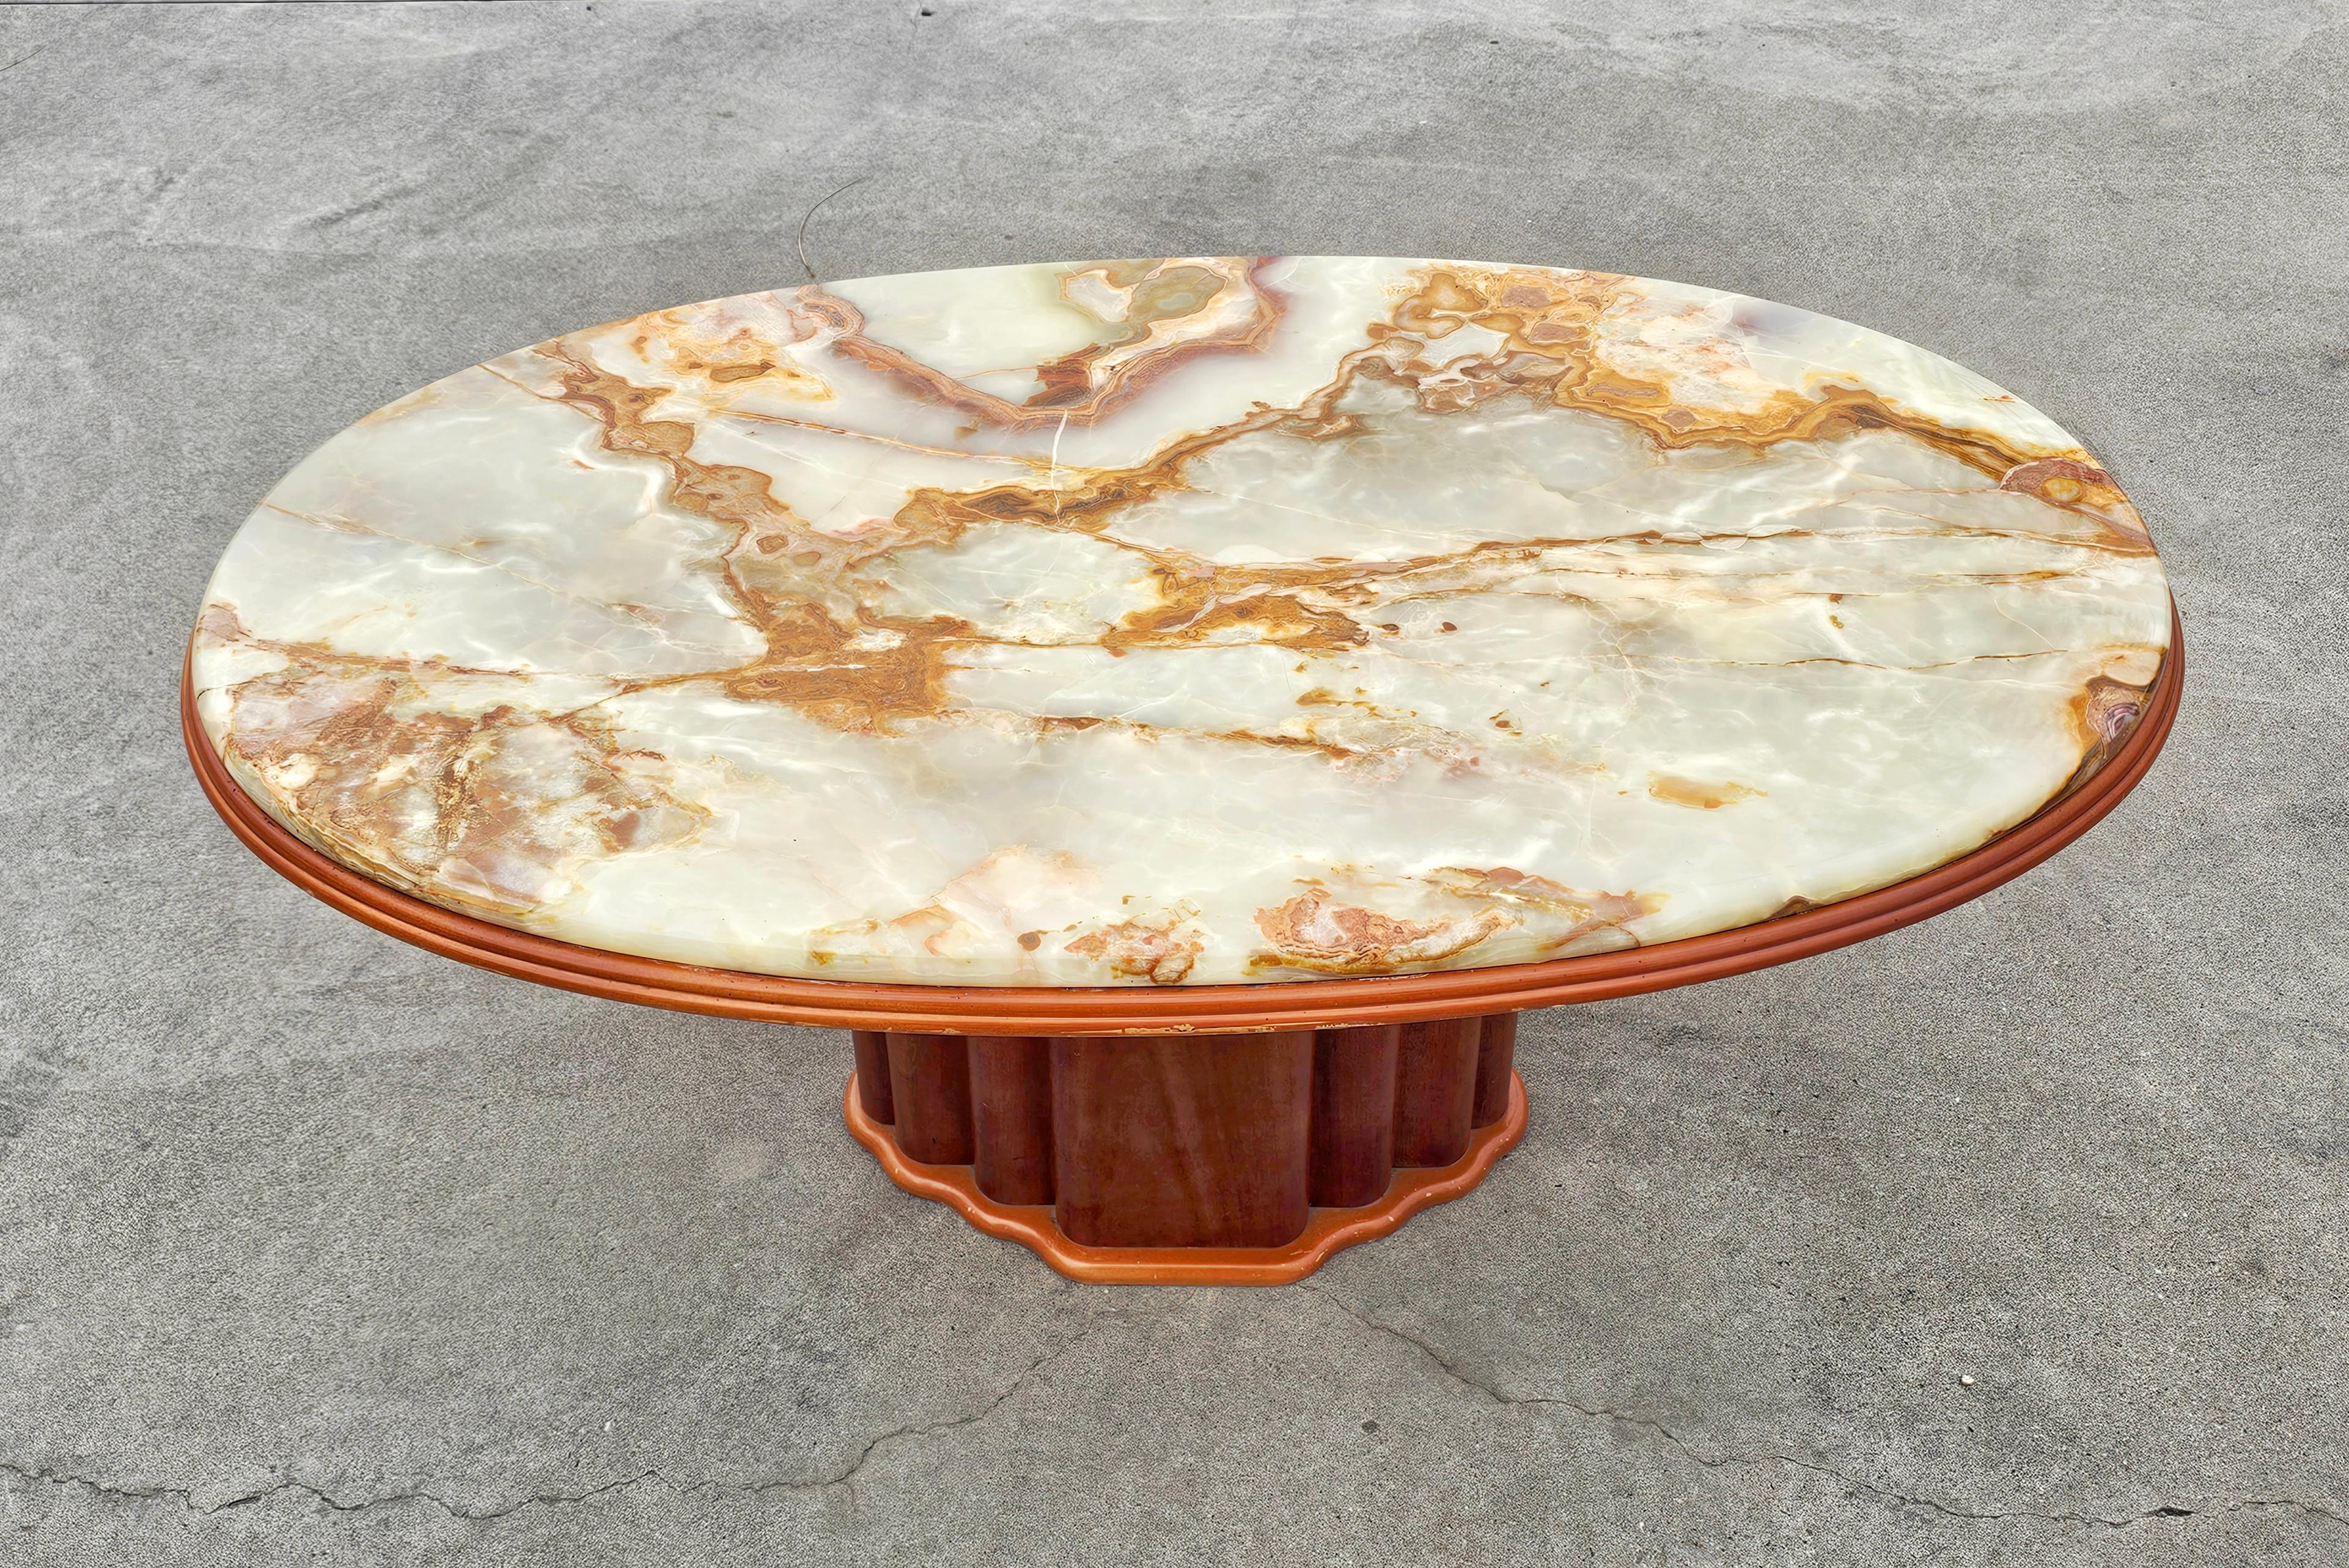 Art Deco Inspired Coffee Table with Onyx Top by Hohnert Design, Germany 1970s For Sale 1